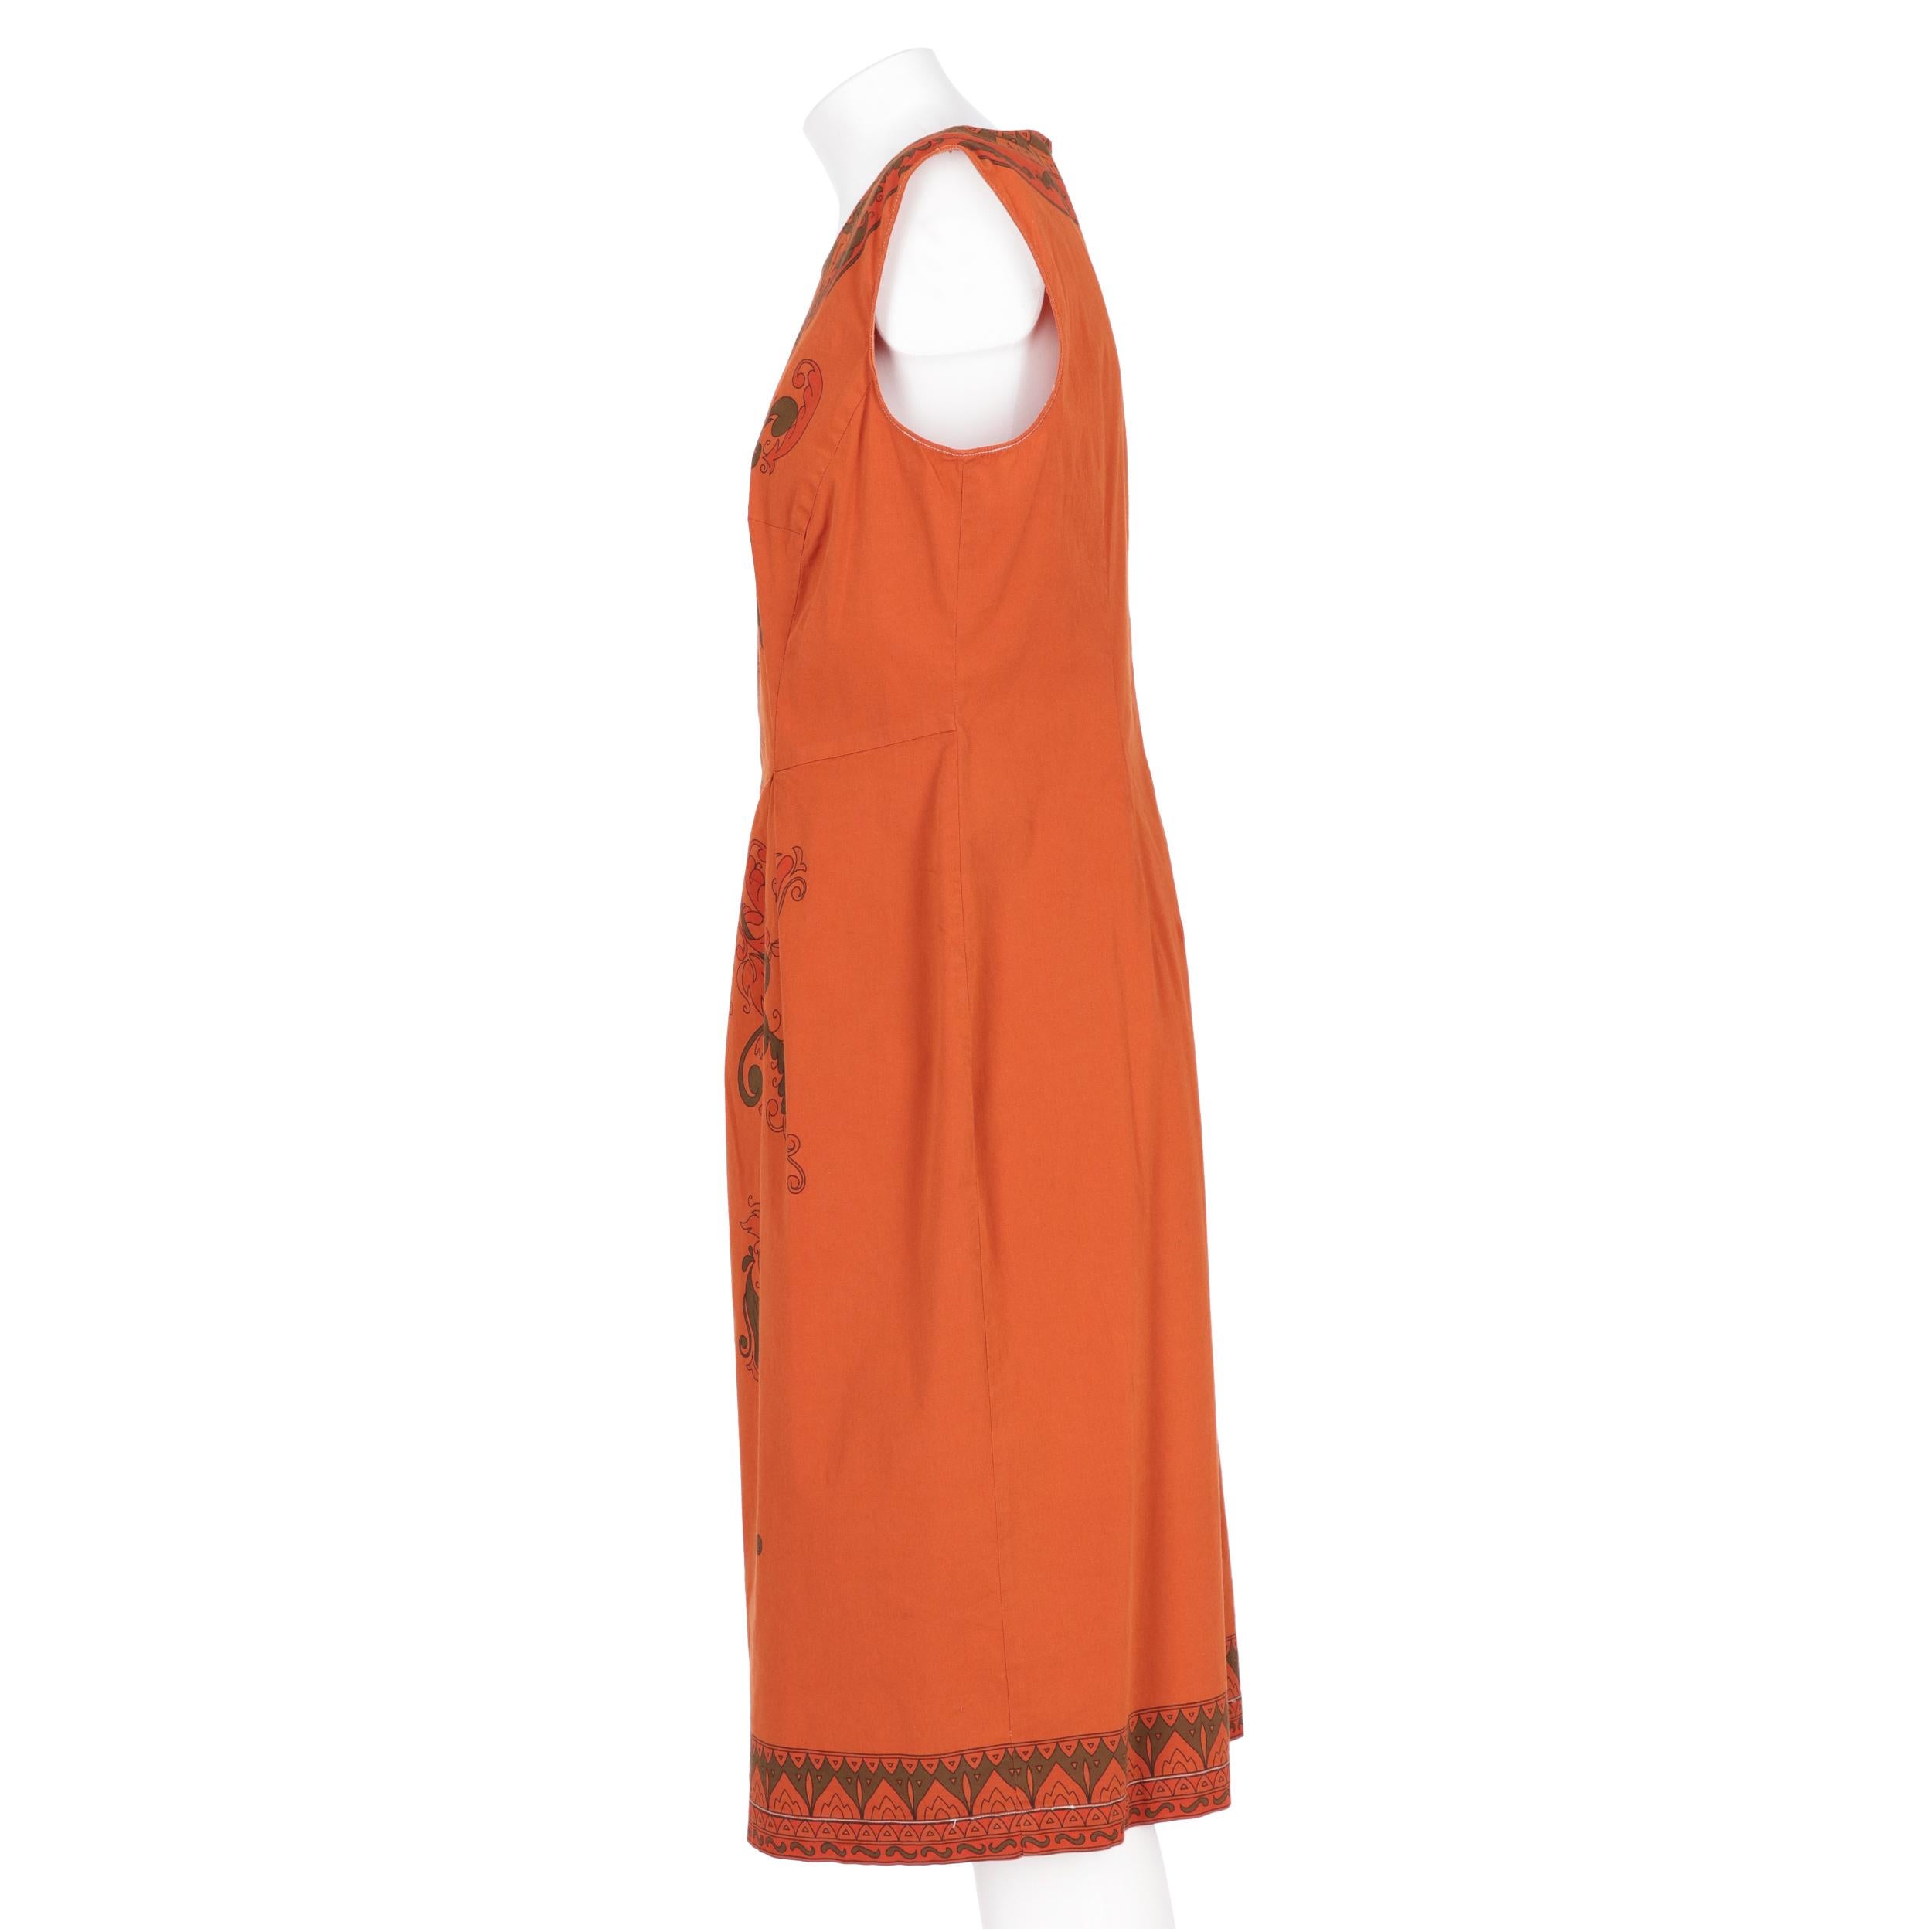 Philosophy orange cotton blend dress with floral print. Round neck, sleeveless and back zip closure.

Years: 90s

Made in Italy

Size: 44 IT

Flat measurements

Height: 107 cm
Bust: 48 cm
Waist: 42 cm